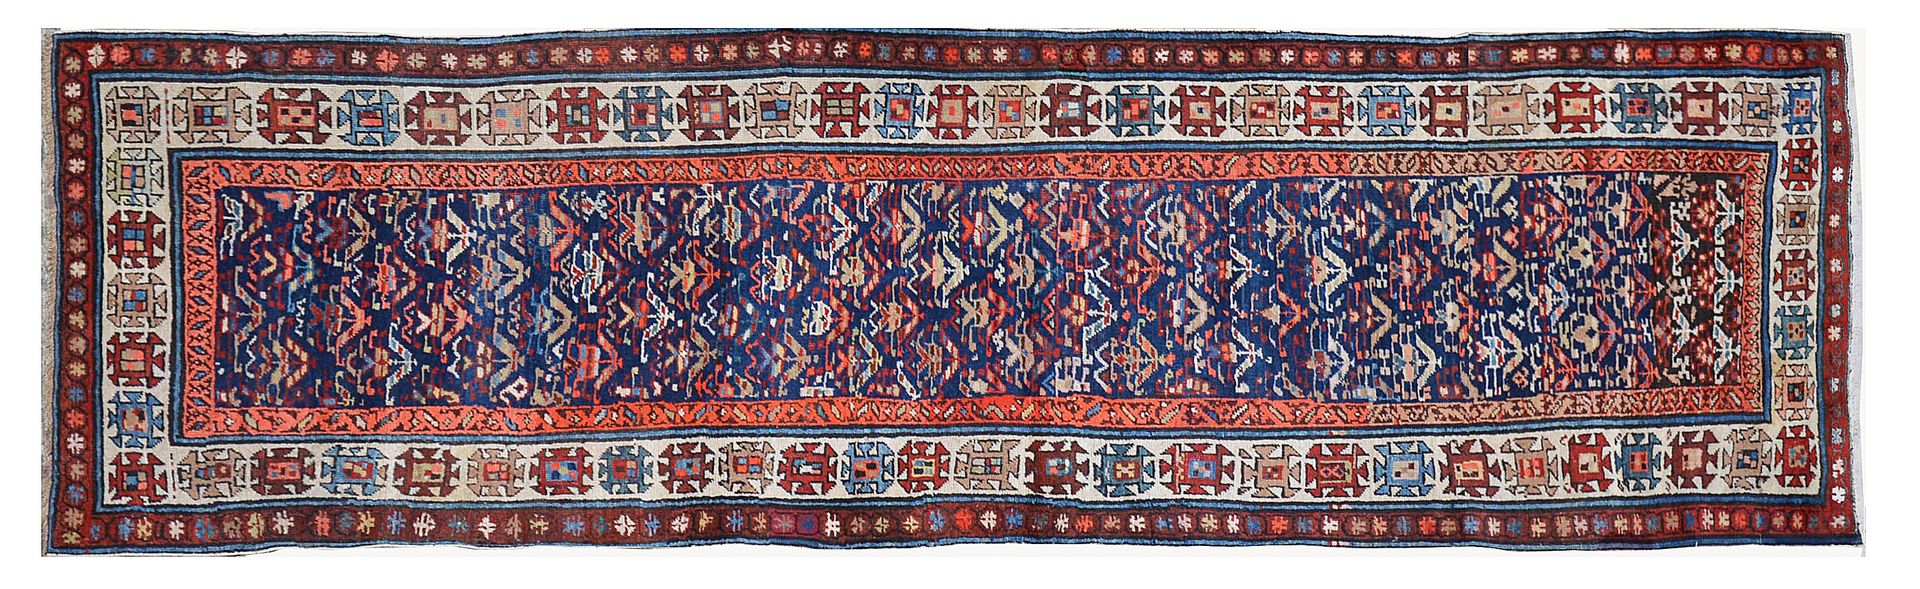 Null TALISH gallery carpet (Caucasus), end of the 19th century

Dimensions : 320&hellip;